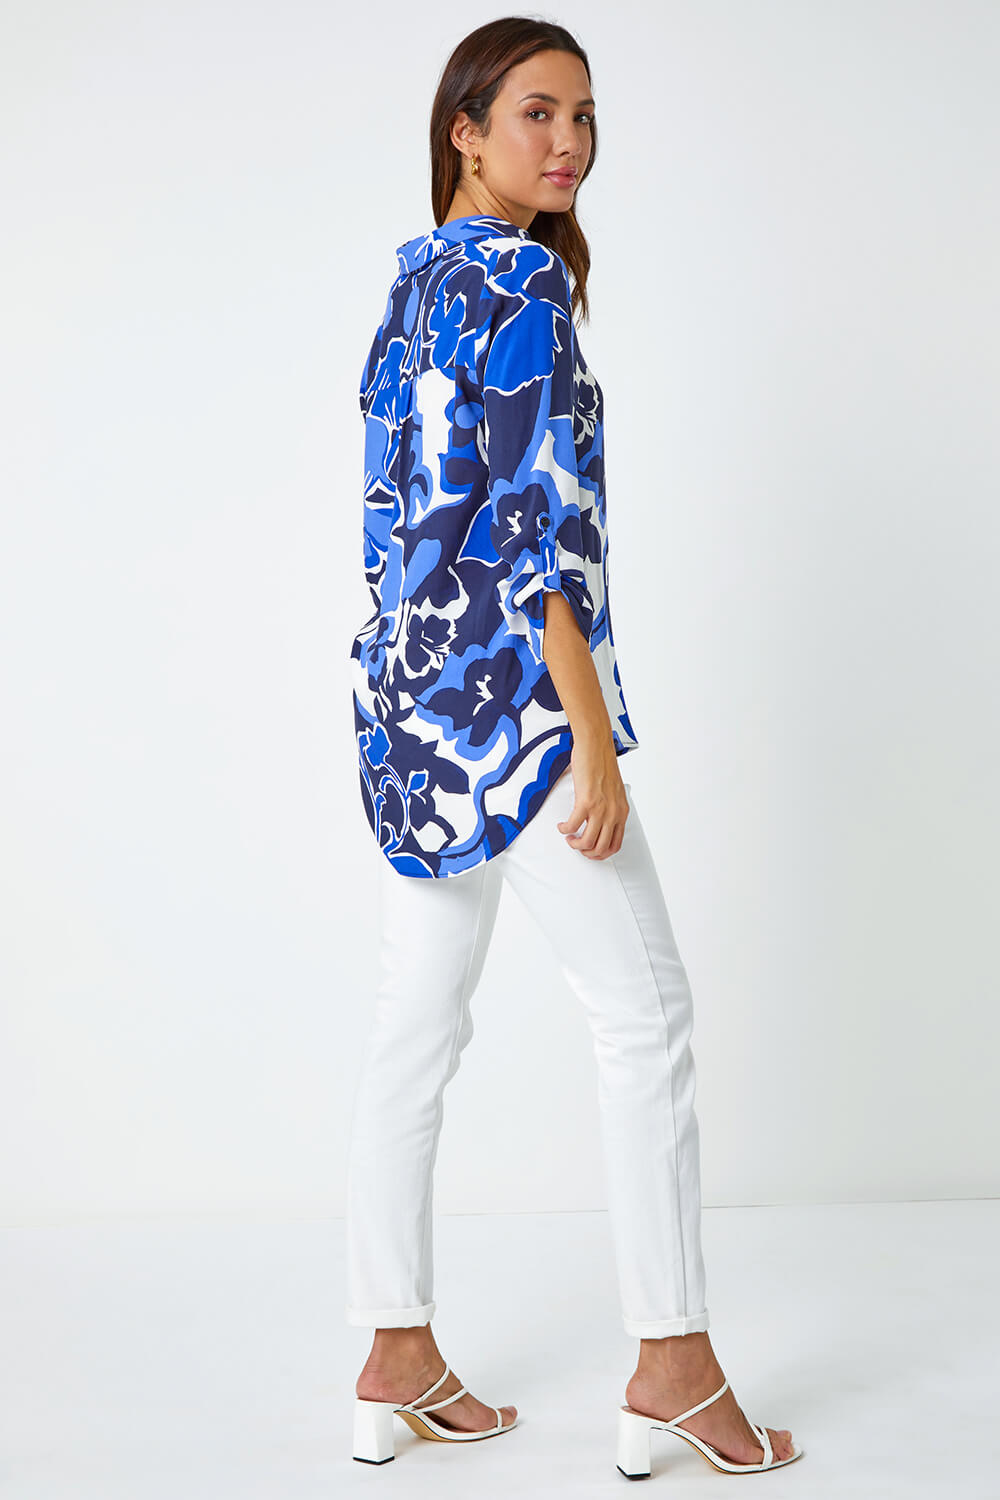 Royal Blue Floral Print Pleat Front Top, Image 4 of 6